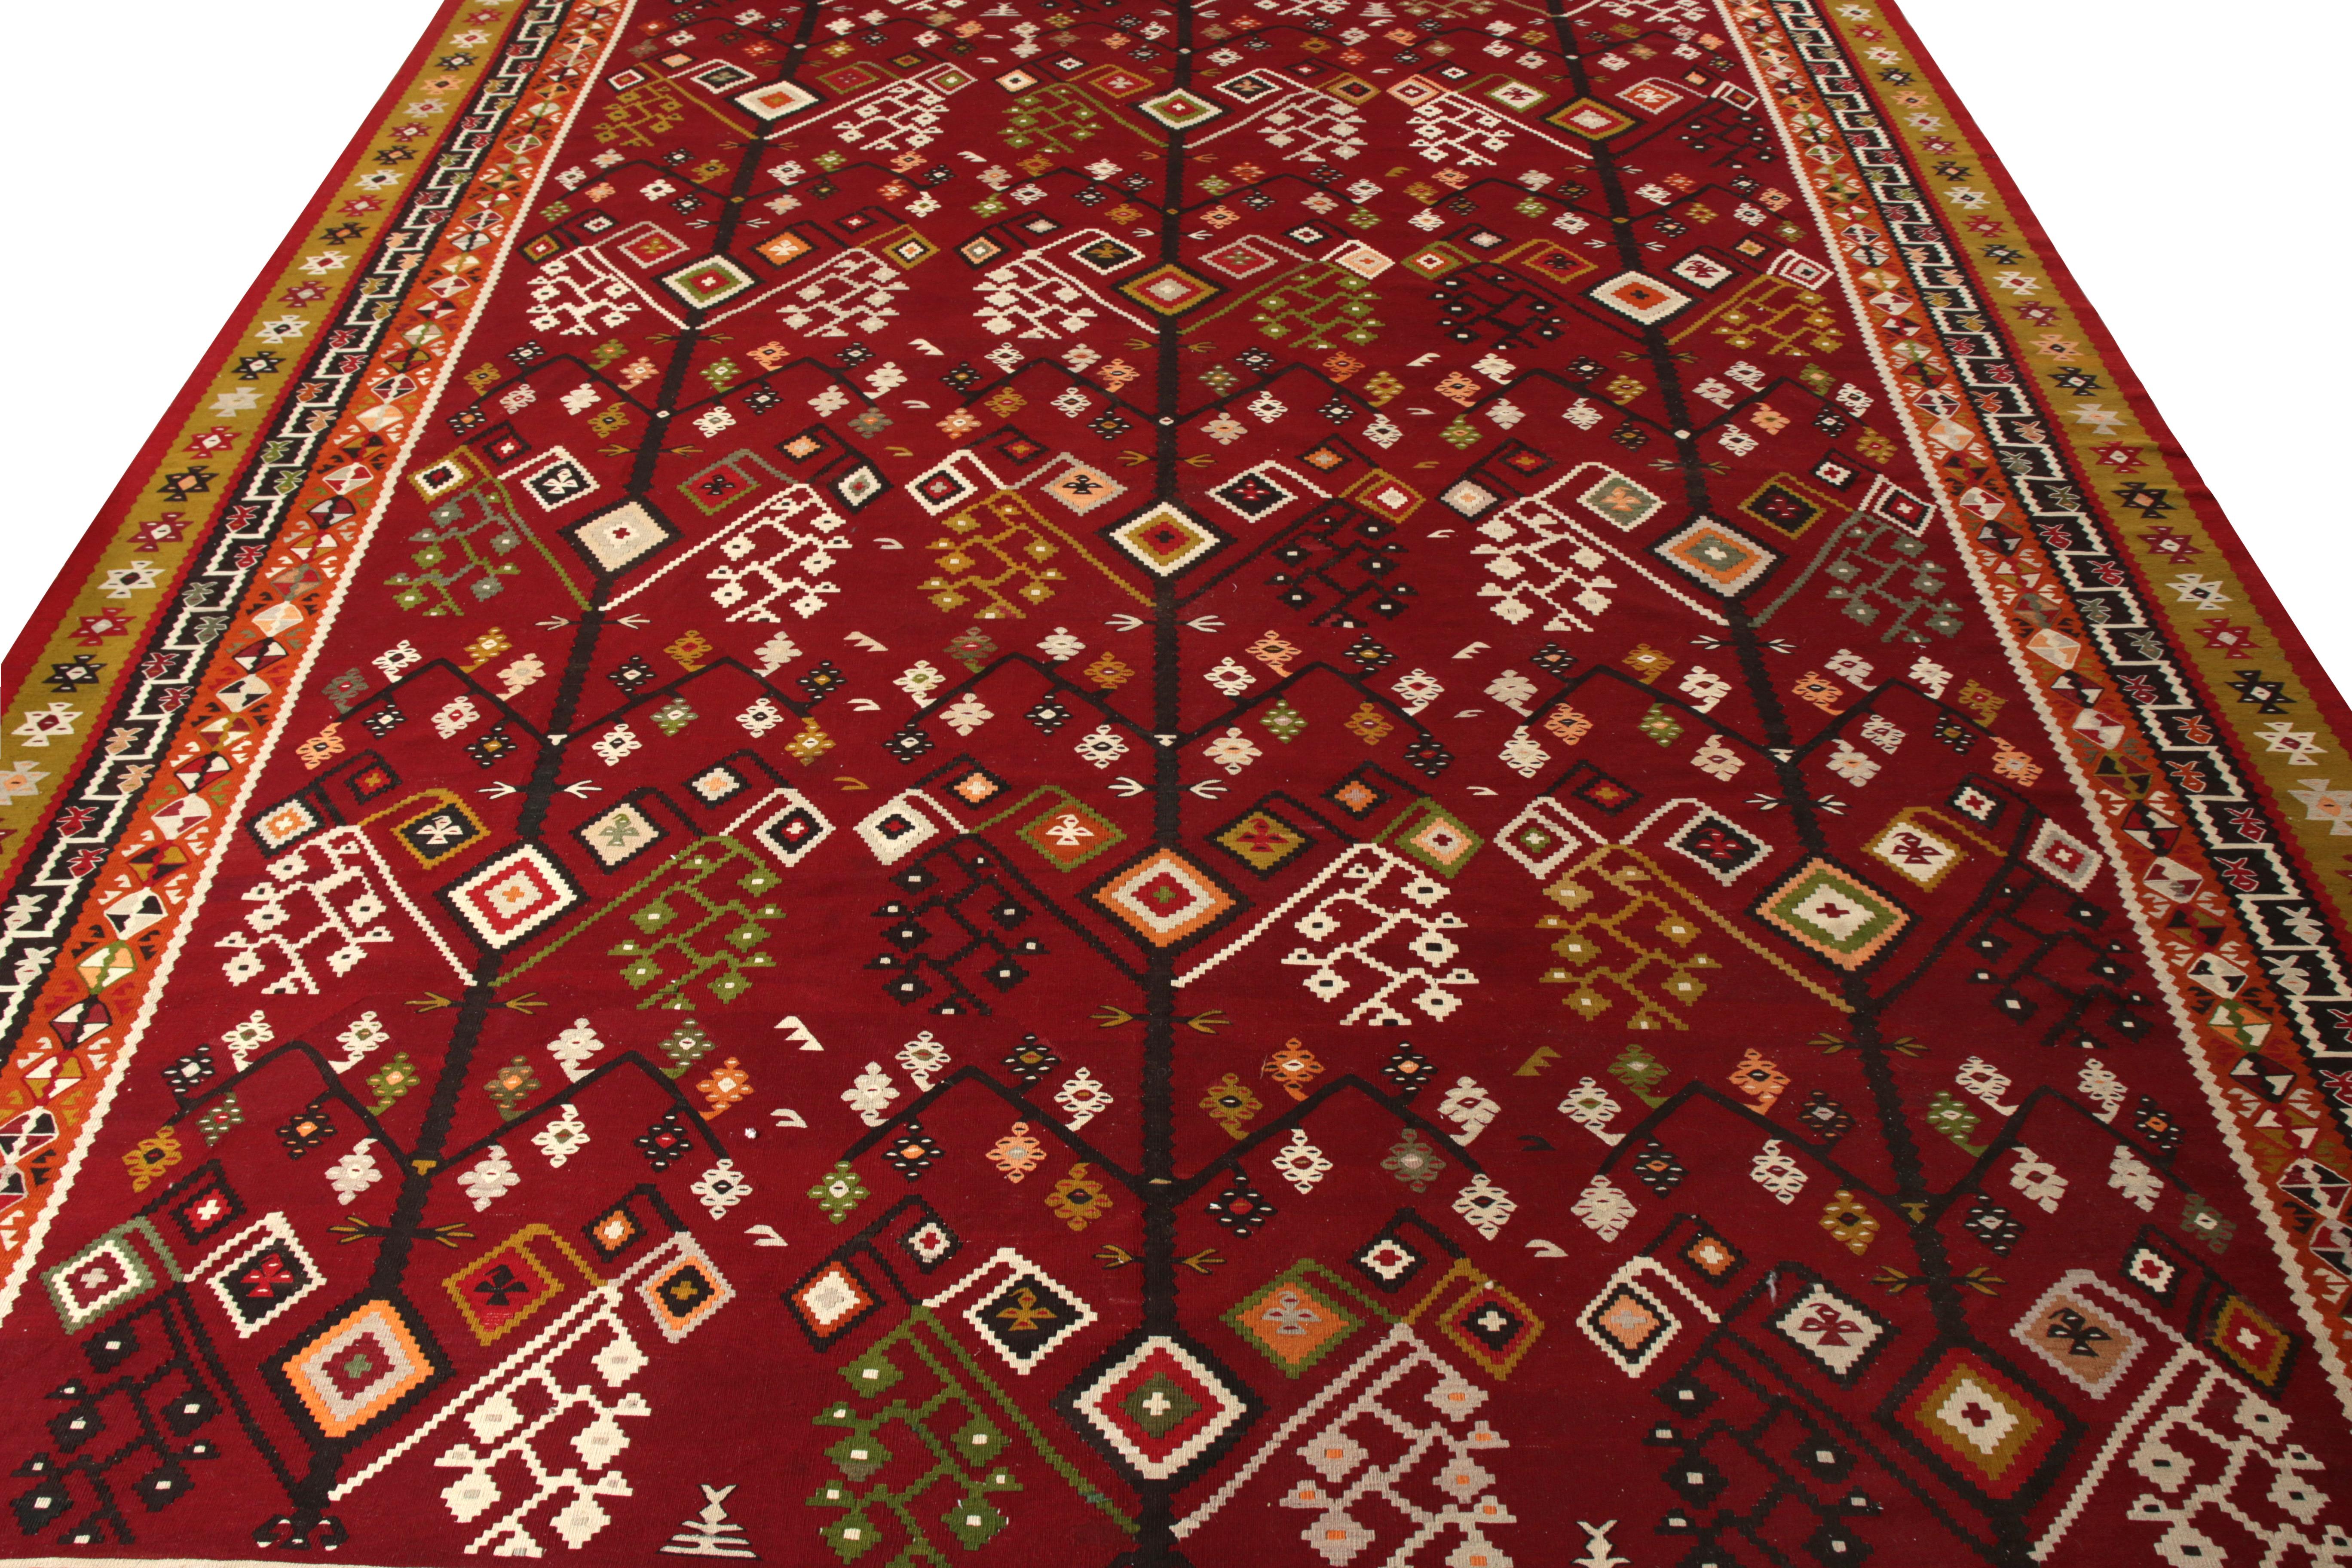 Handwoven in wool originating from Turkey circa 1950–1960, this vintage 12 x 15 Kilim rug enjoys a rare large size for its period and regal mood. An intricate all over design flows lavishly from end to end rejoicing an awe inspiring pattern in a